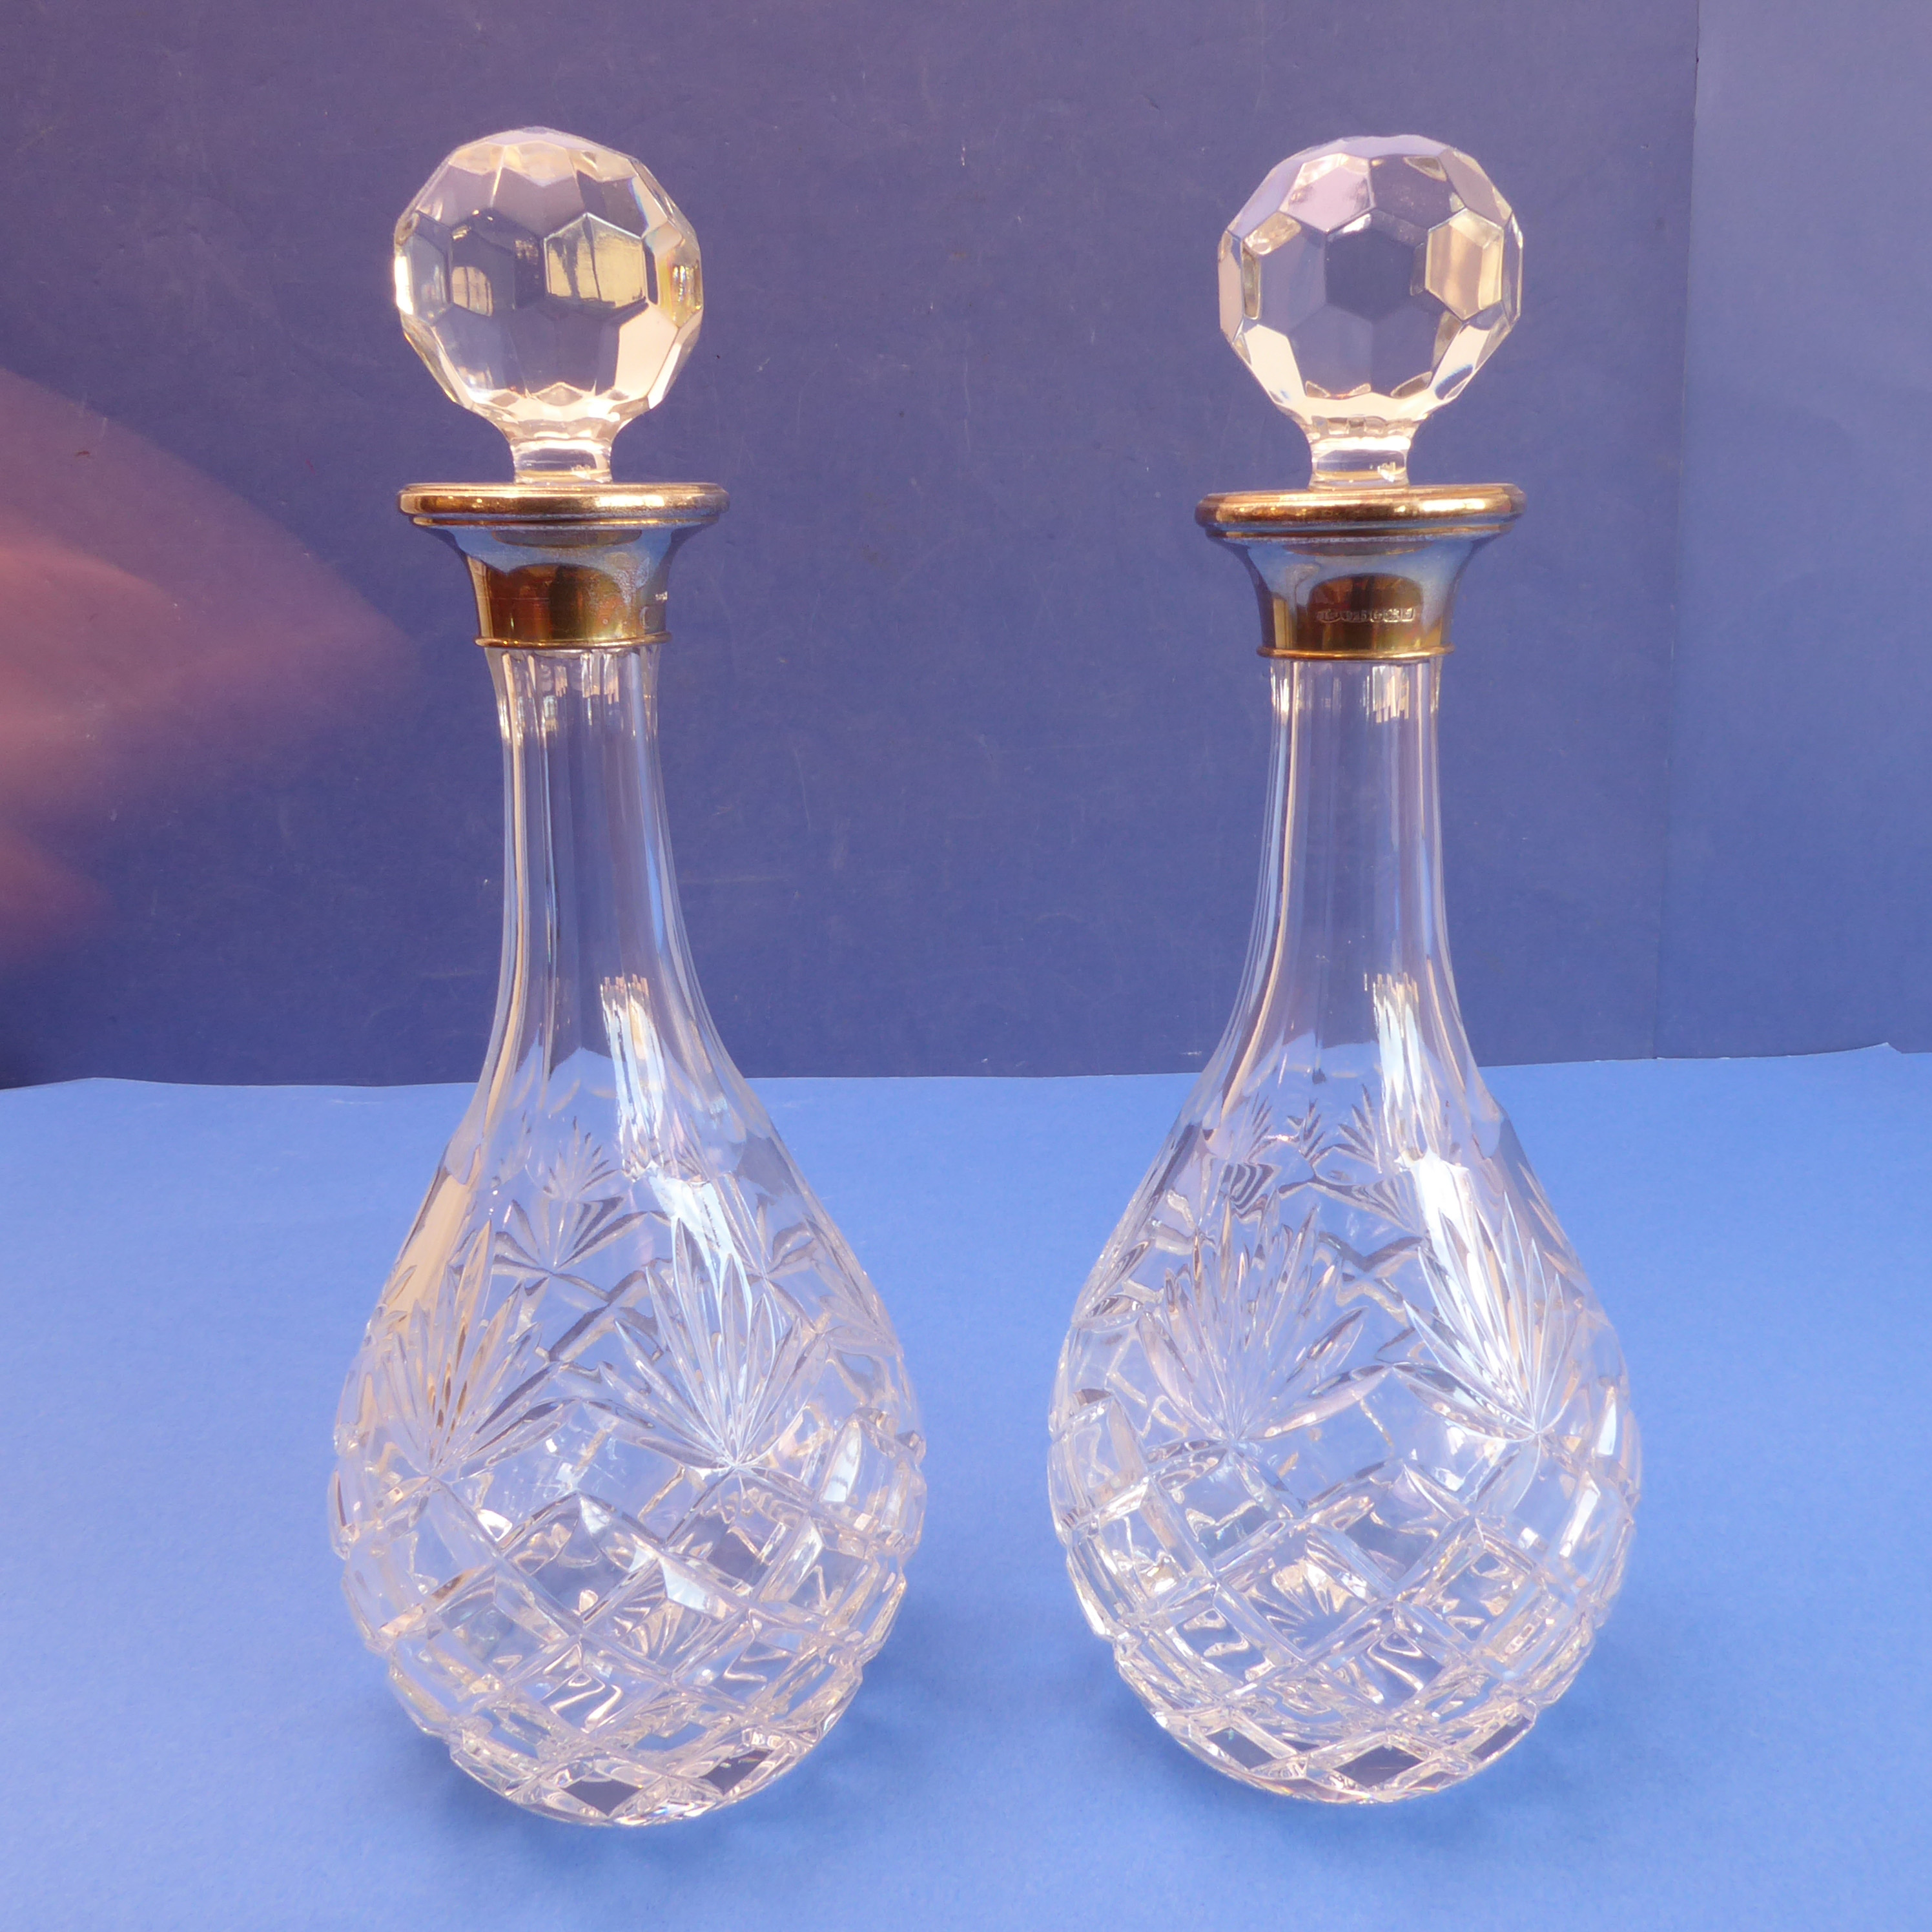 A pair of modern cut-glass club-shaped decanters; each with hallmarked silver-mounted collar (31.5cm